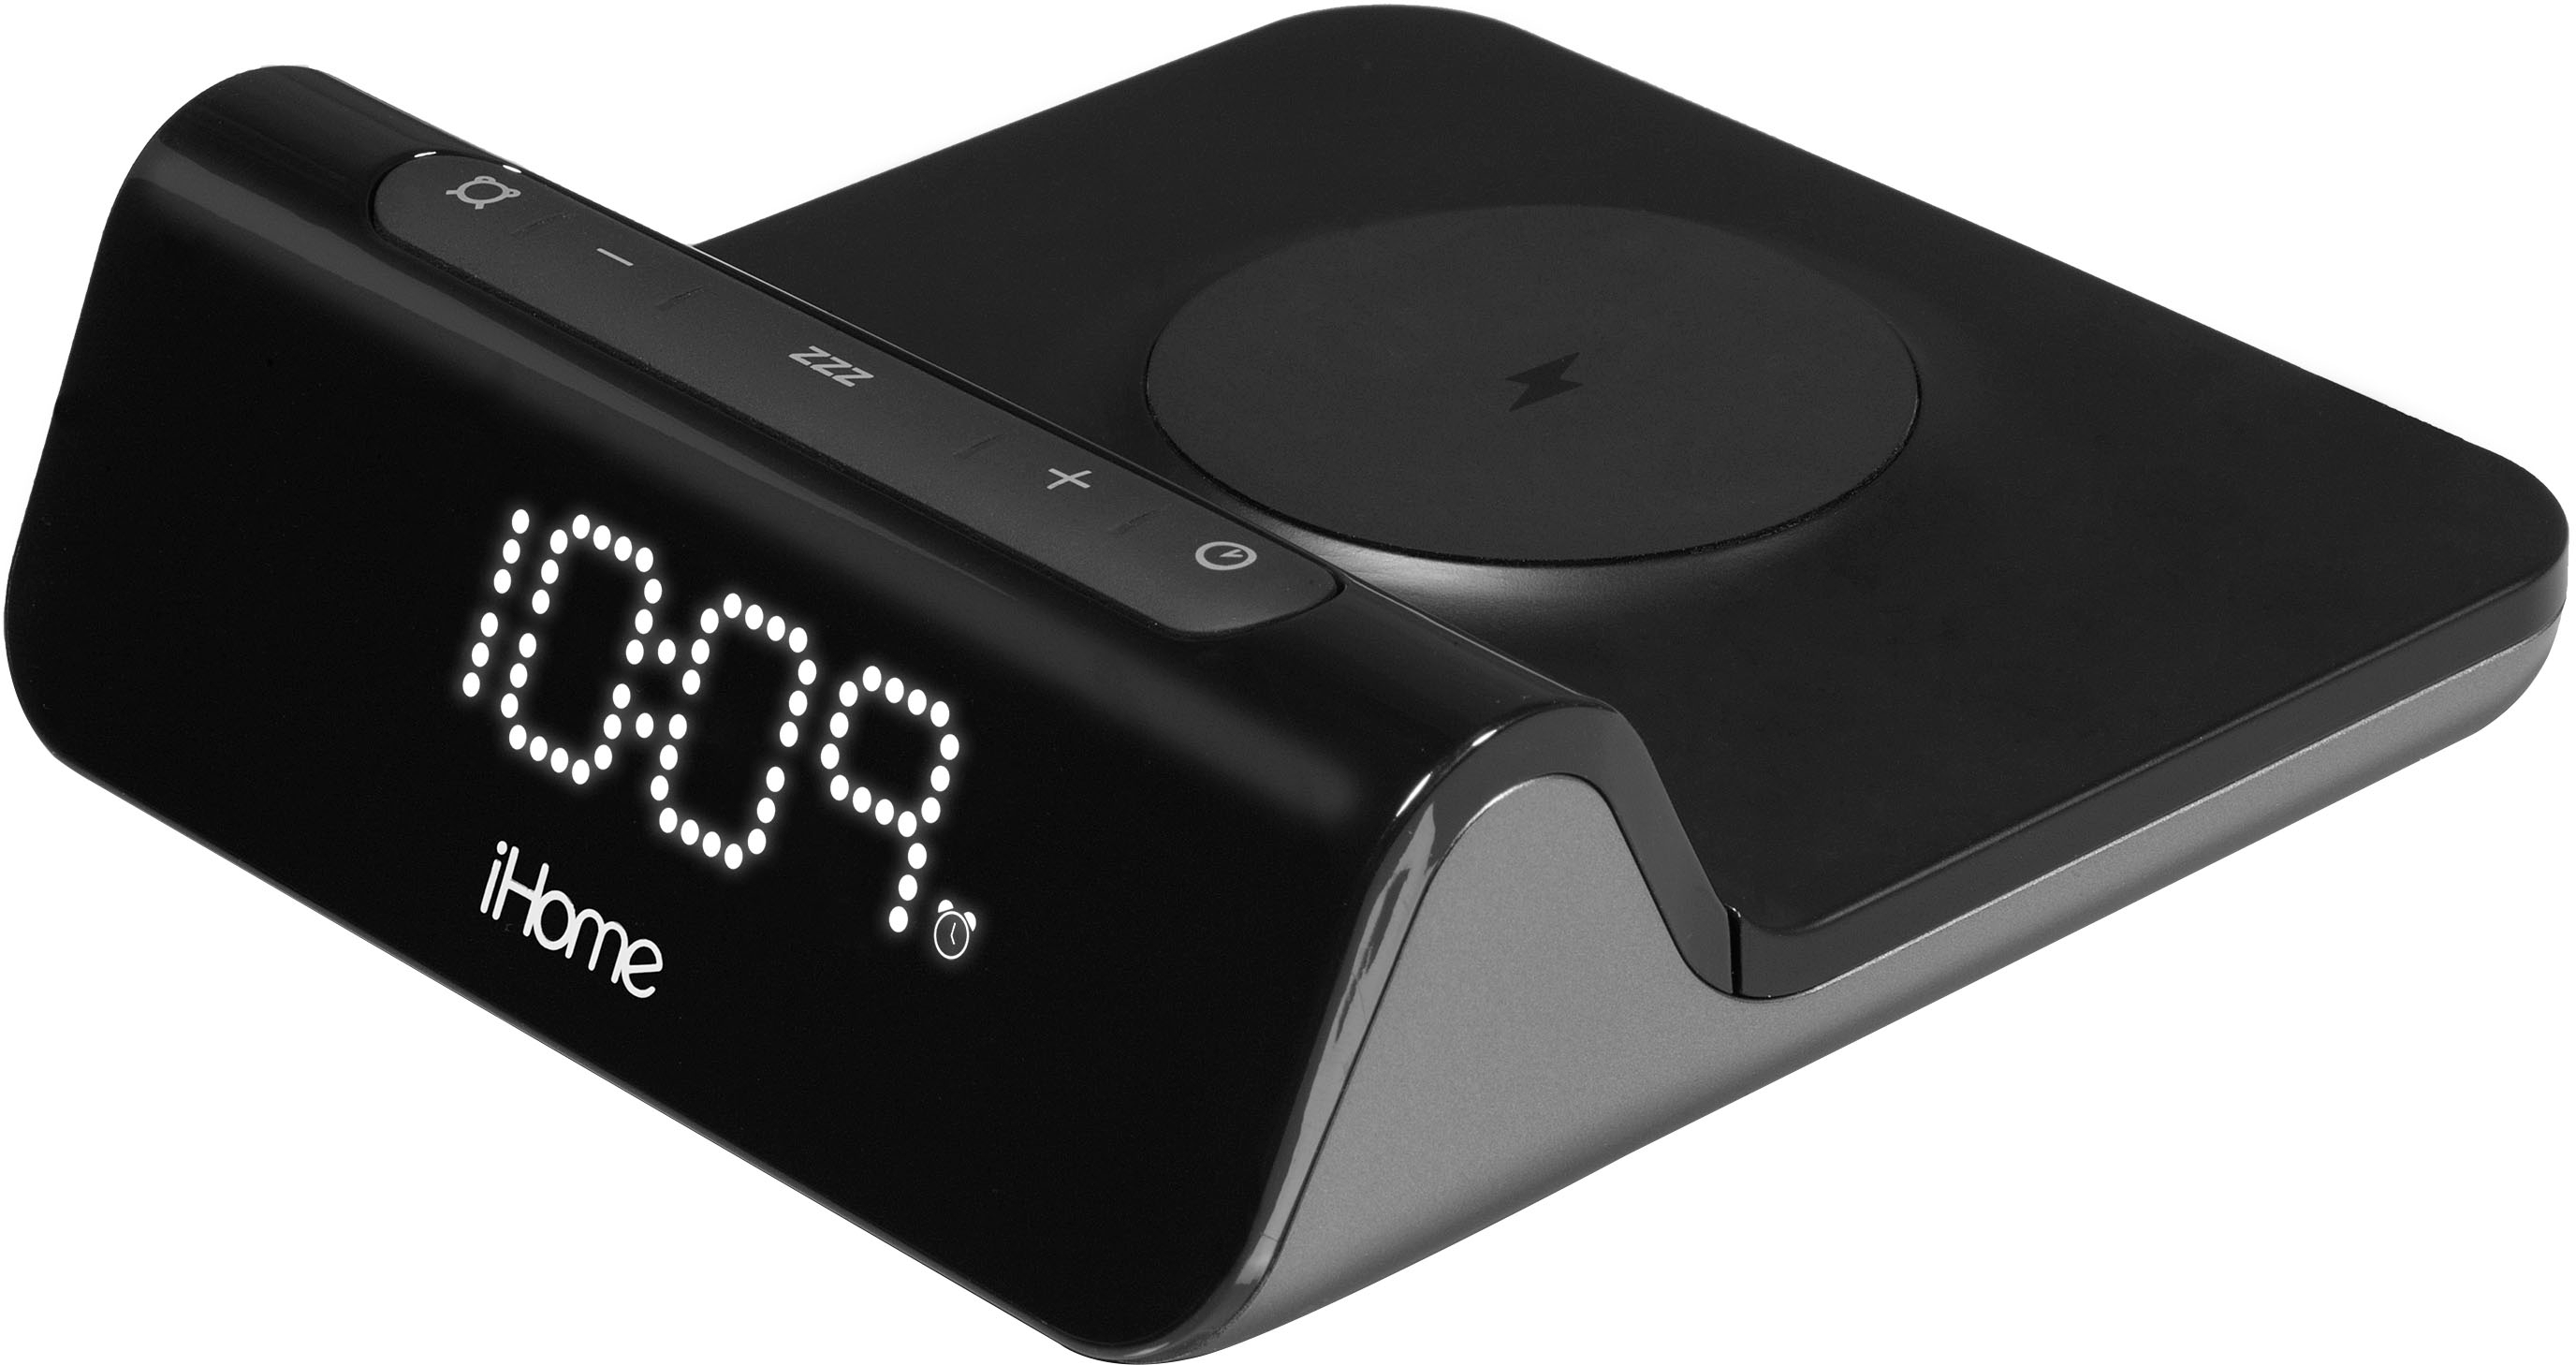 Choice 20 Hour Digital Timer with Clip and Magnet